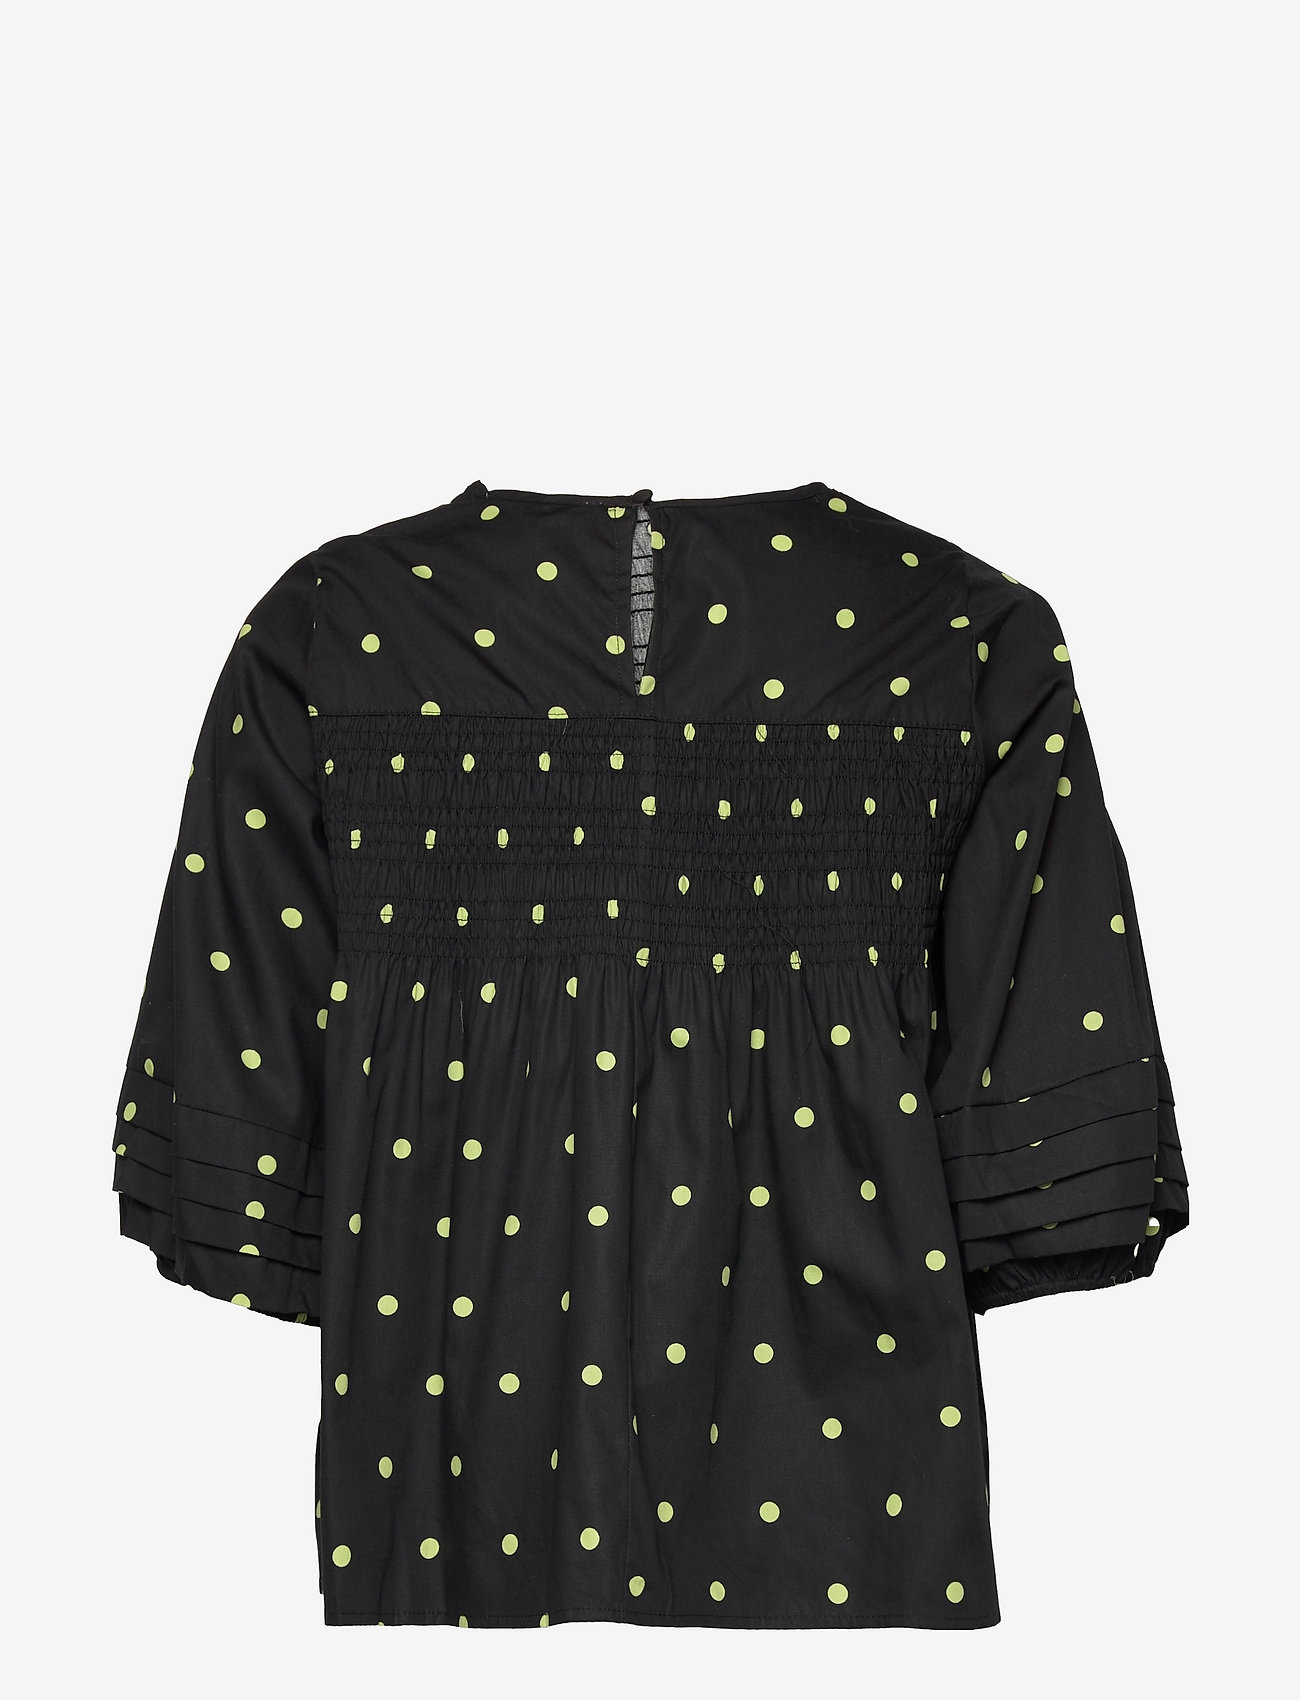 A-View - Sisse blouse - lyhythihaiset puserot - black with green dots - 1